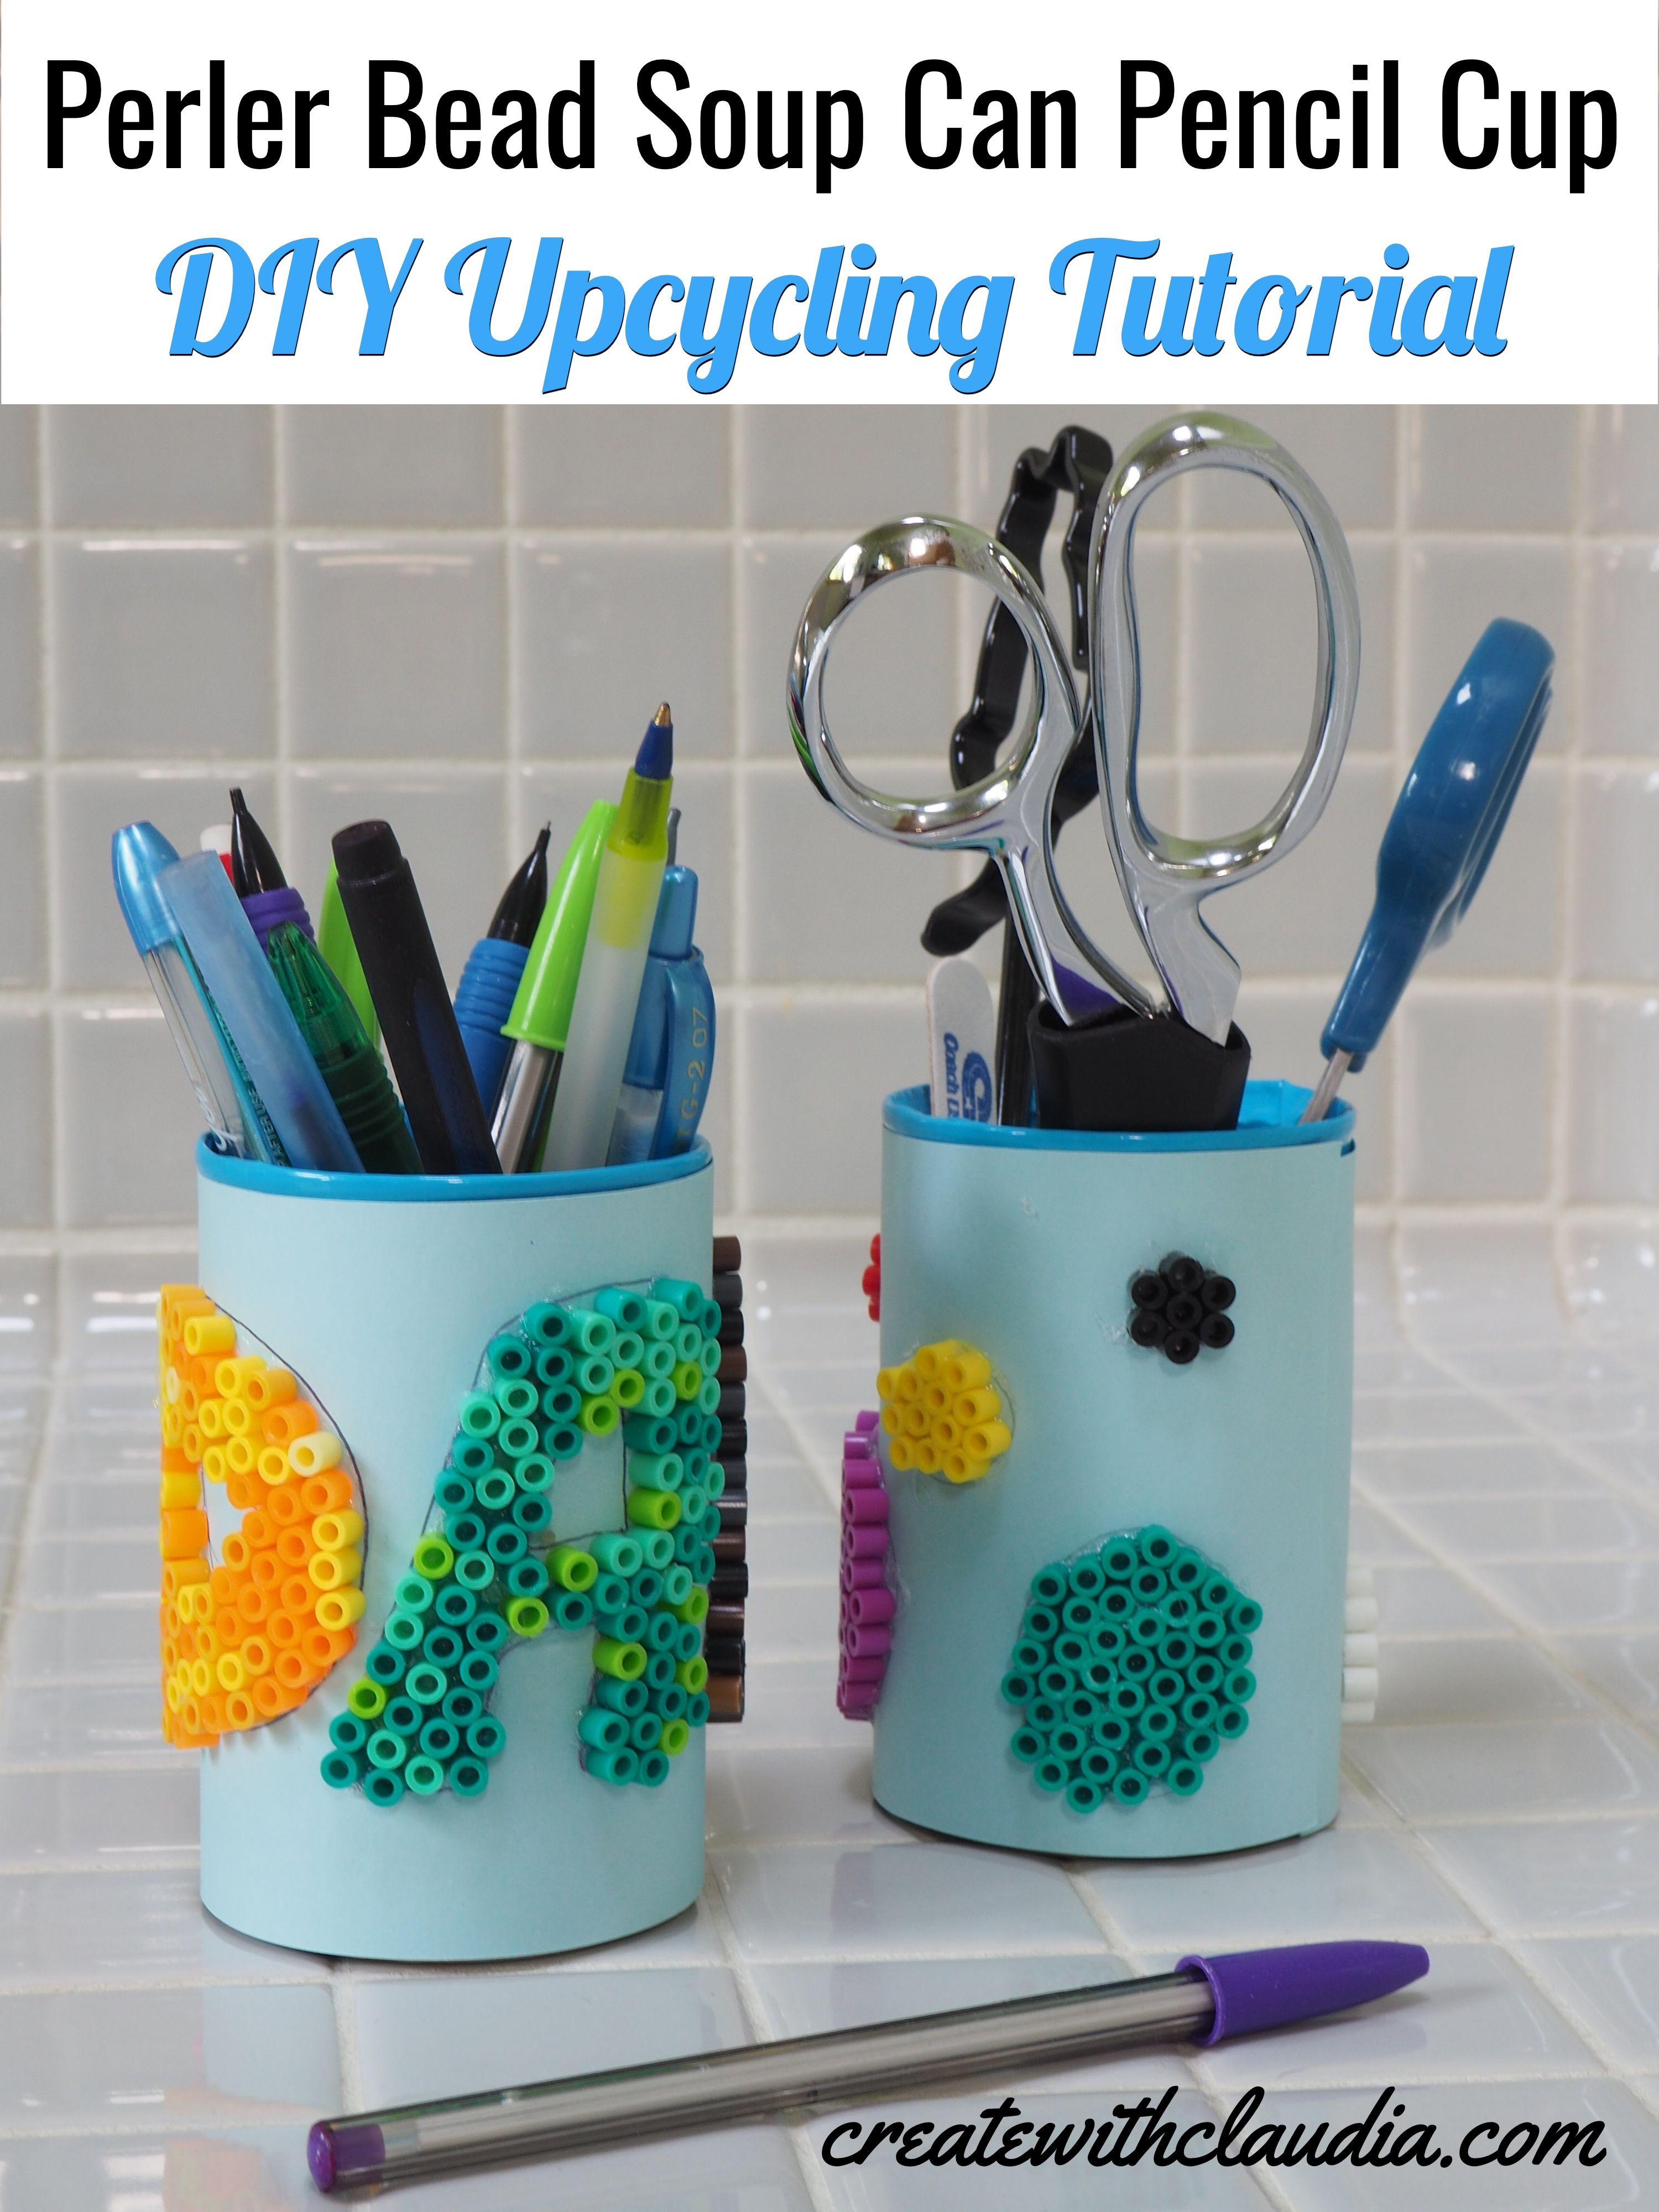 Perler Bead Soup Can Pencil Cup - Create with Claudia